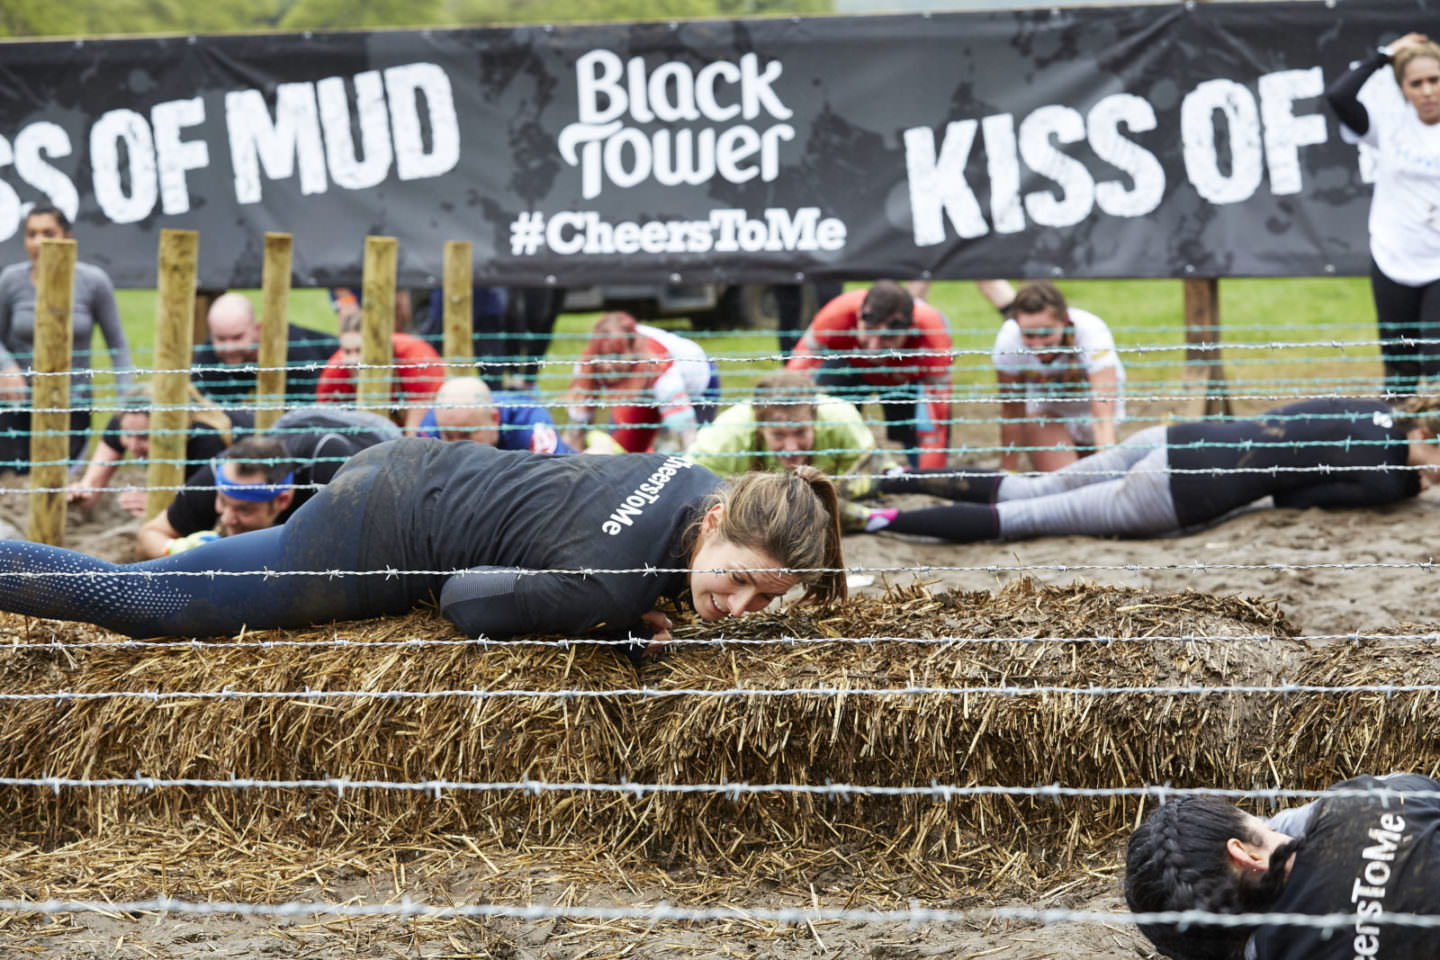 Tough Mudder with Black Tower